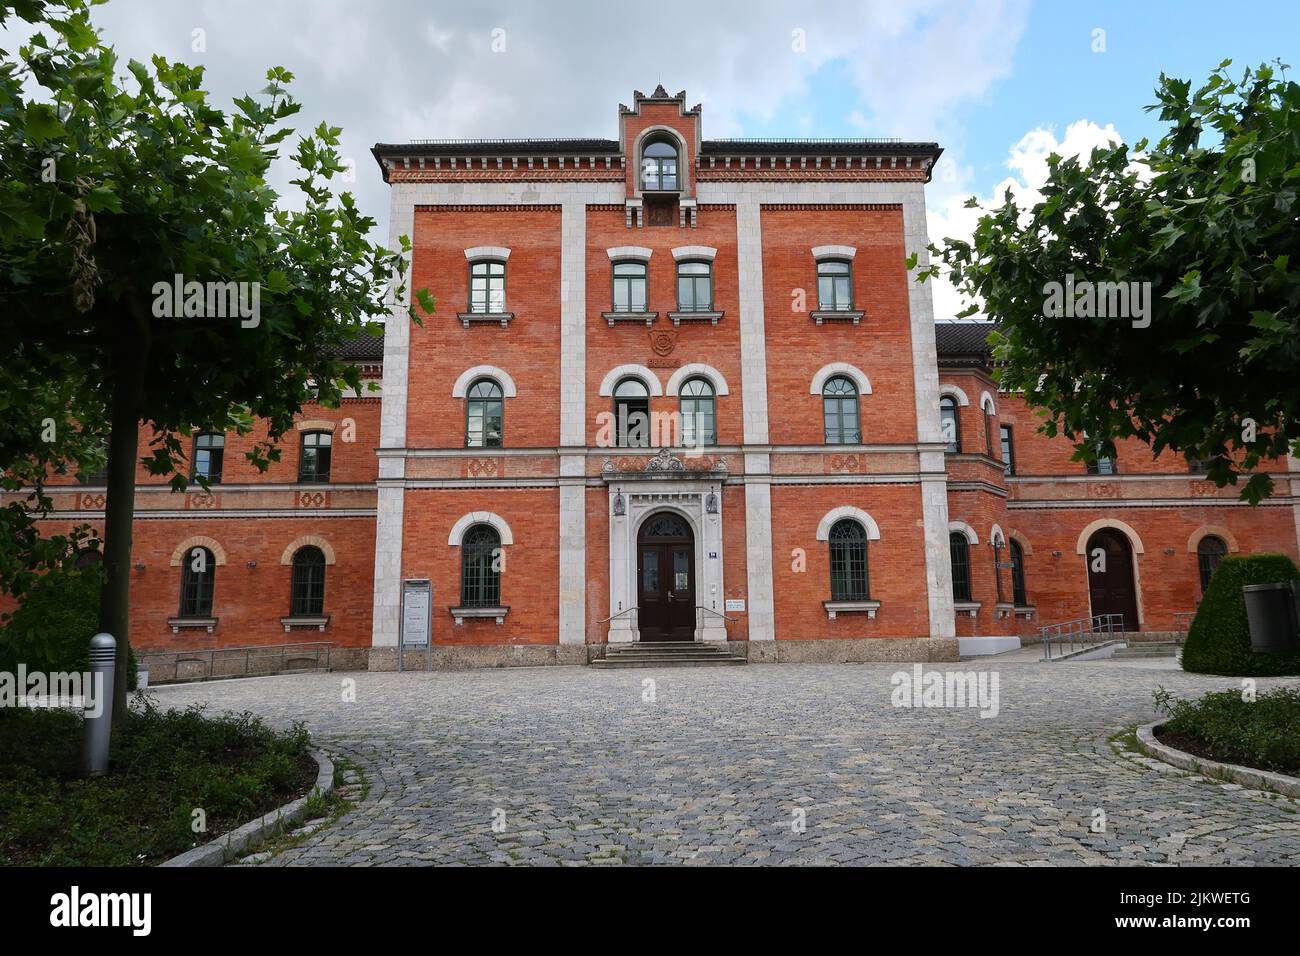 Town hall of the city Rosenheim in Bayern, Germany. The building is used as police department in the german TV show 'Rosenheim Cops' Stock Photo